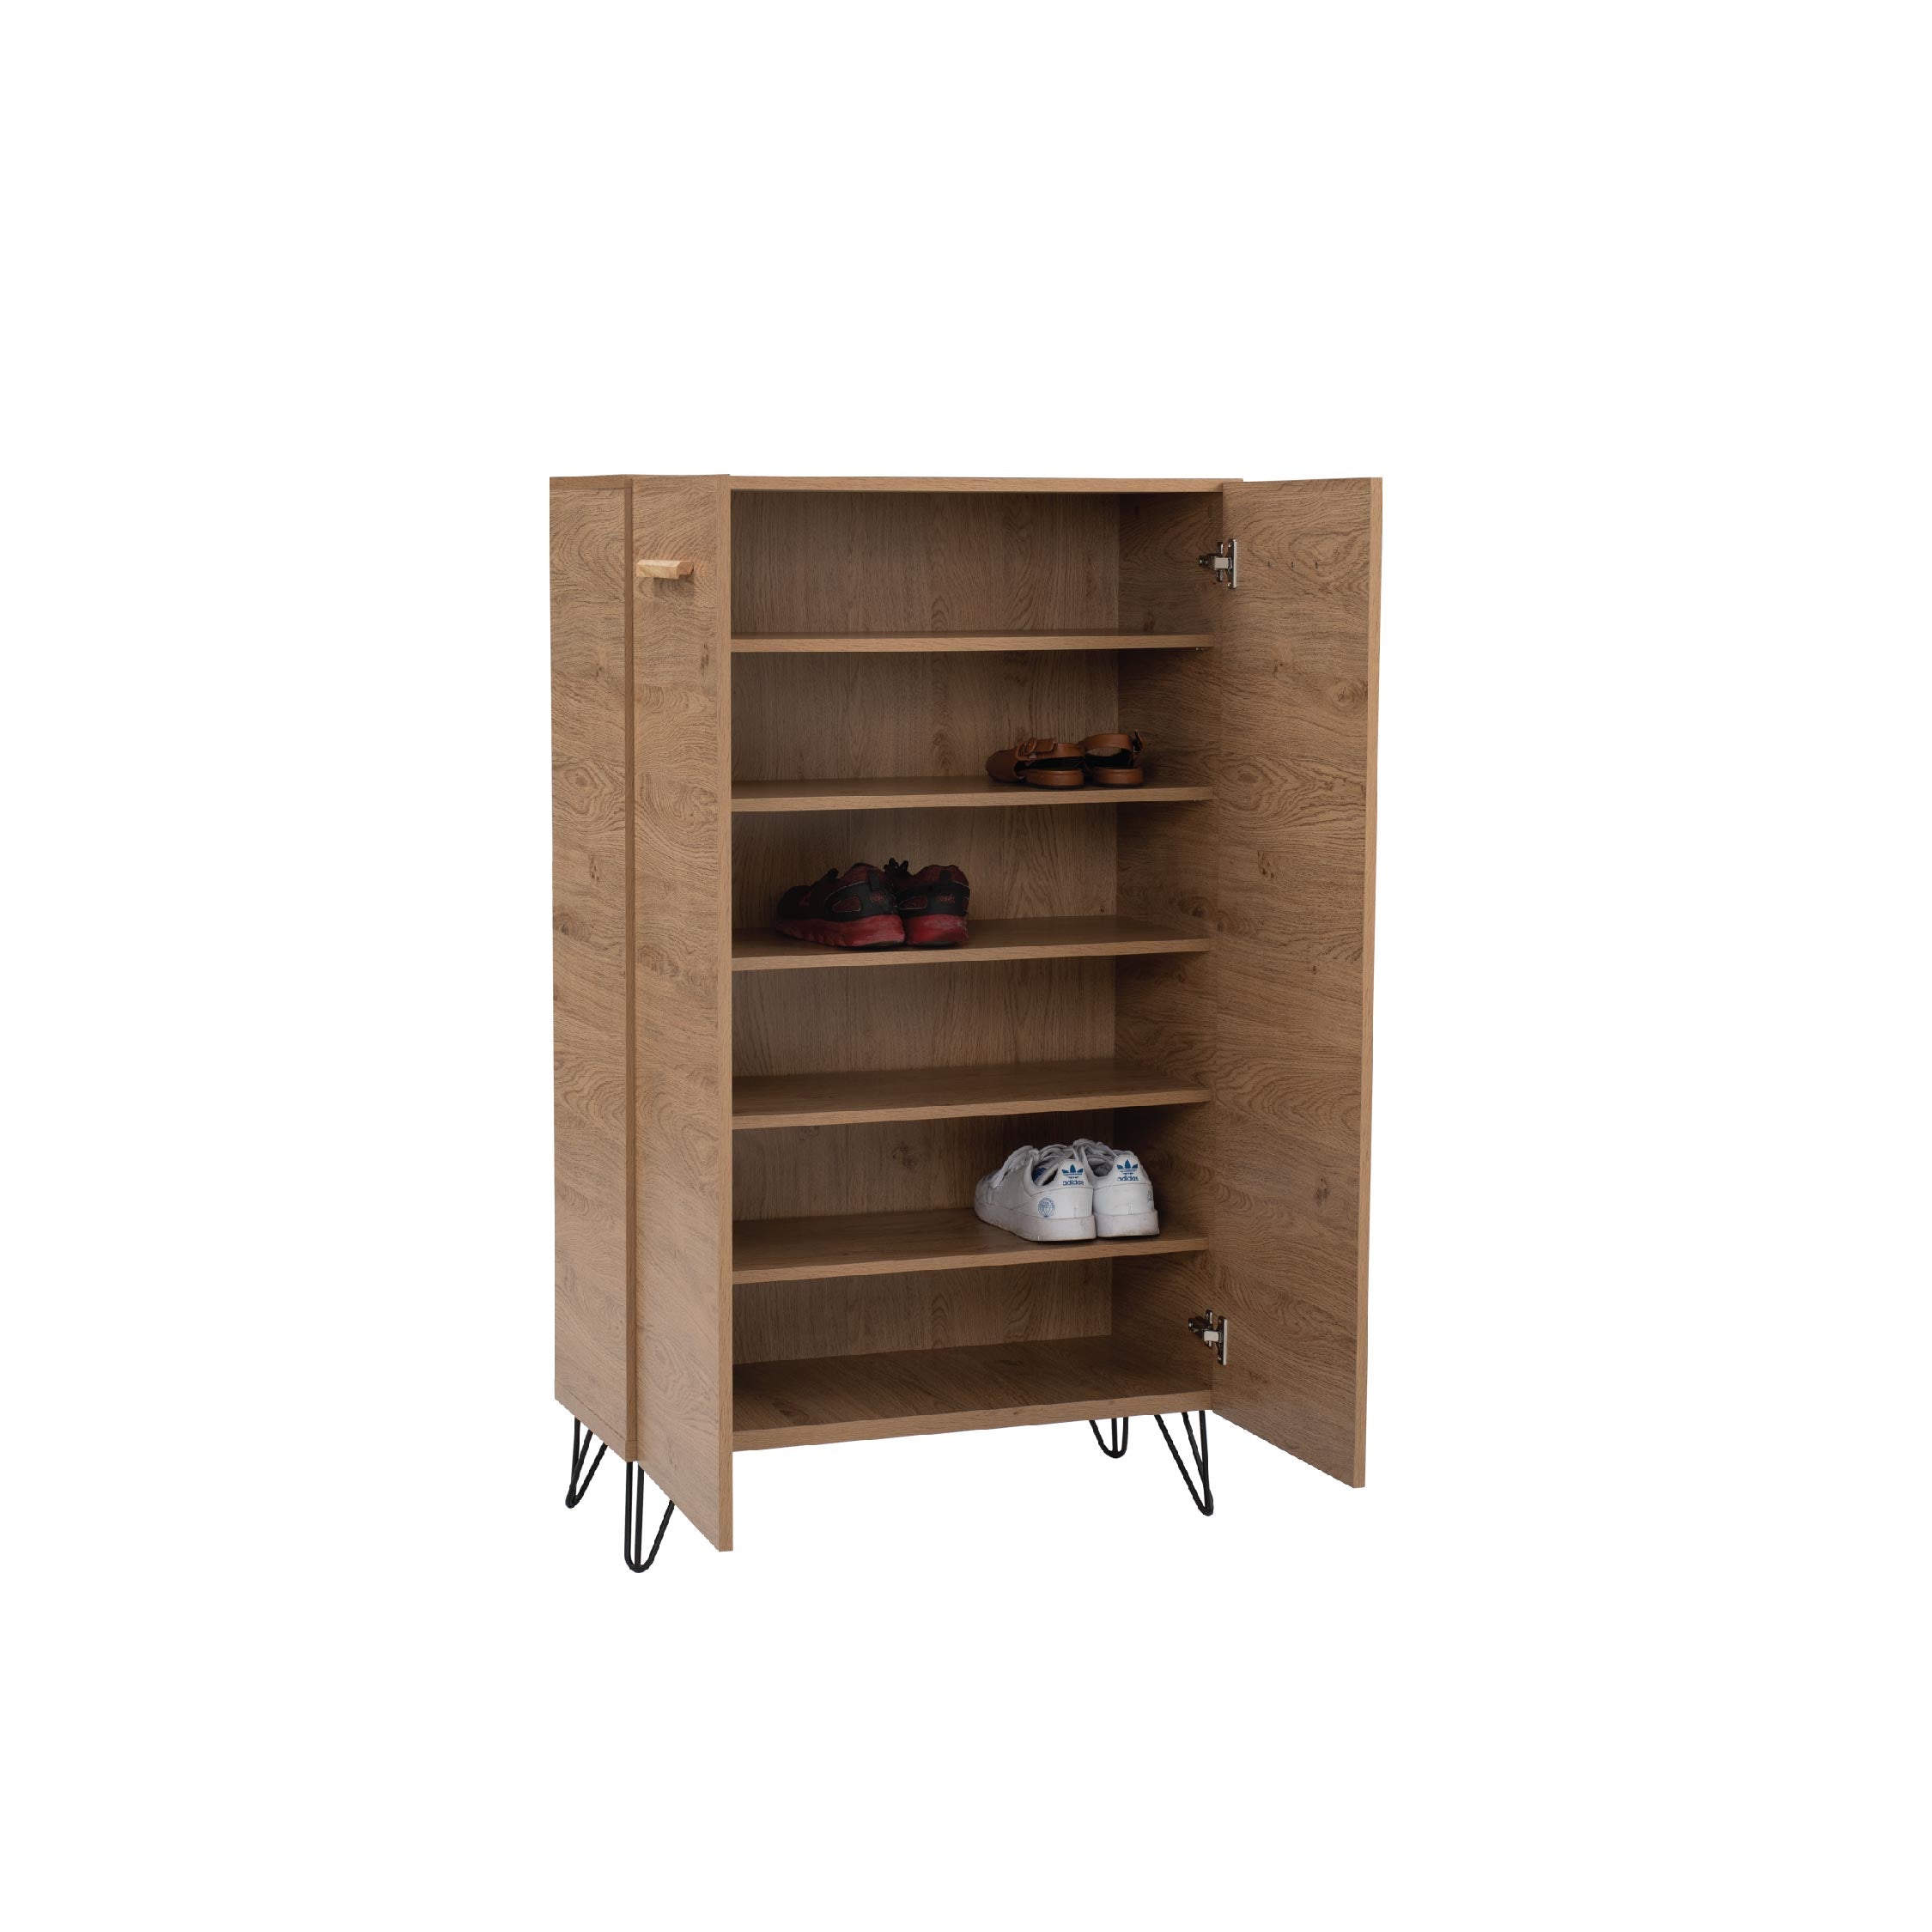 INRA Shoe Cabinet